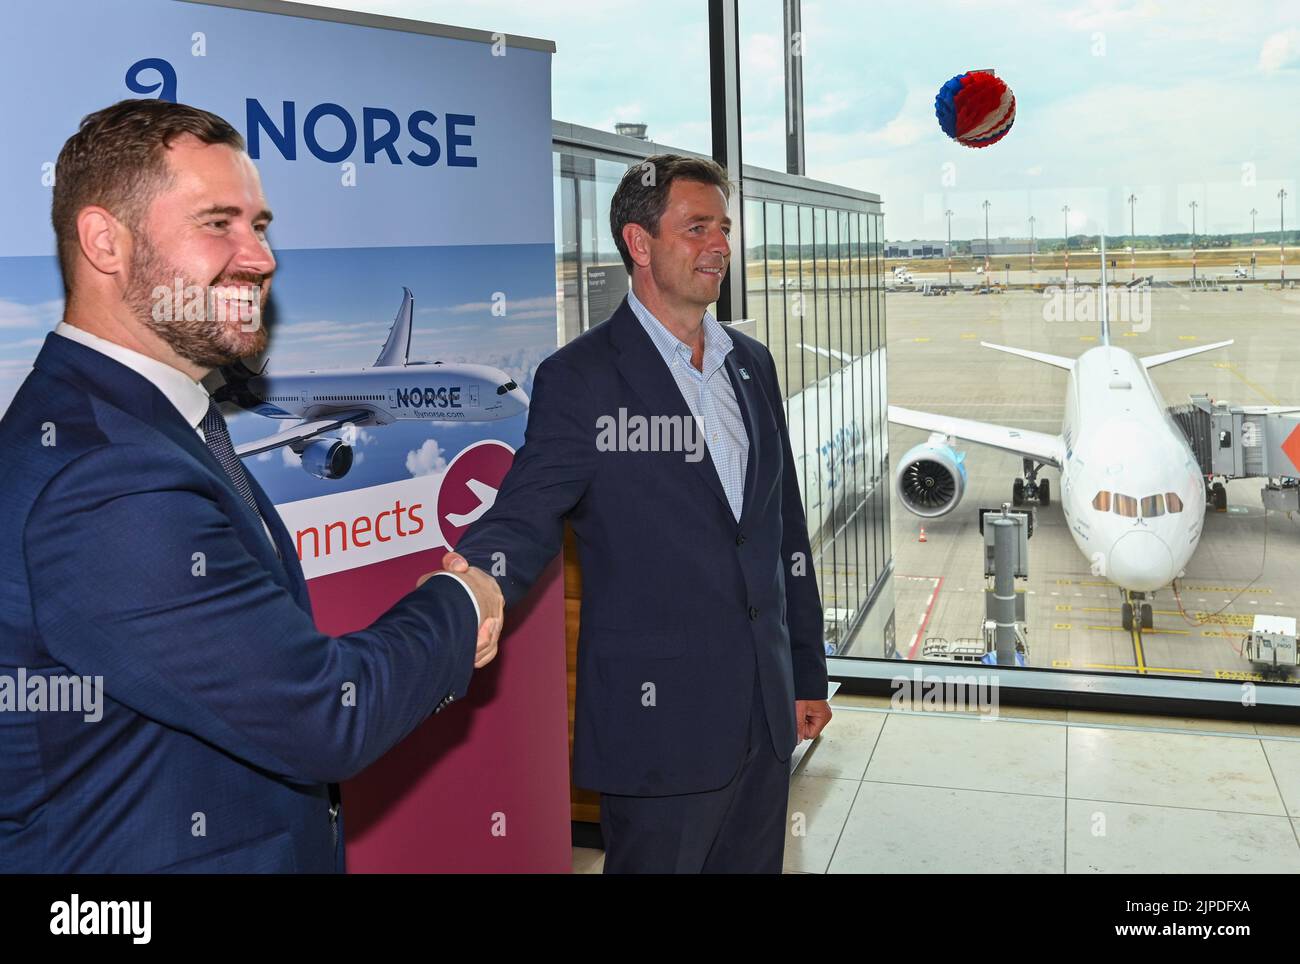 17 August 2022, Brandenburg, Schönefeld: Thomas Hoff Andersson (l), Managing Director for Airport Operations at BER, and Björn Tore Larsen, CEO of Norse Atlantic Airways, stand in front of a Boeing 787 Dreamliner ahead of the first flight from the capital's airport BER to New York (JFK). The airline Norse Atlantic Airways will launch its first flight from BER Airport to New York (JFK) on August 17. Photo: Patrick Pleul/dpa Stock Photo